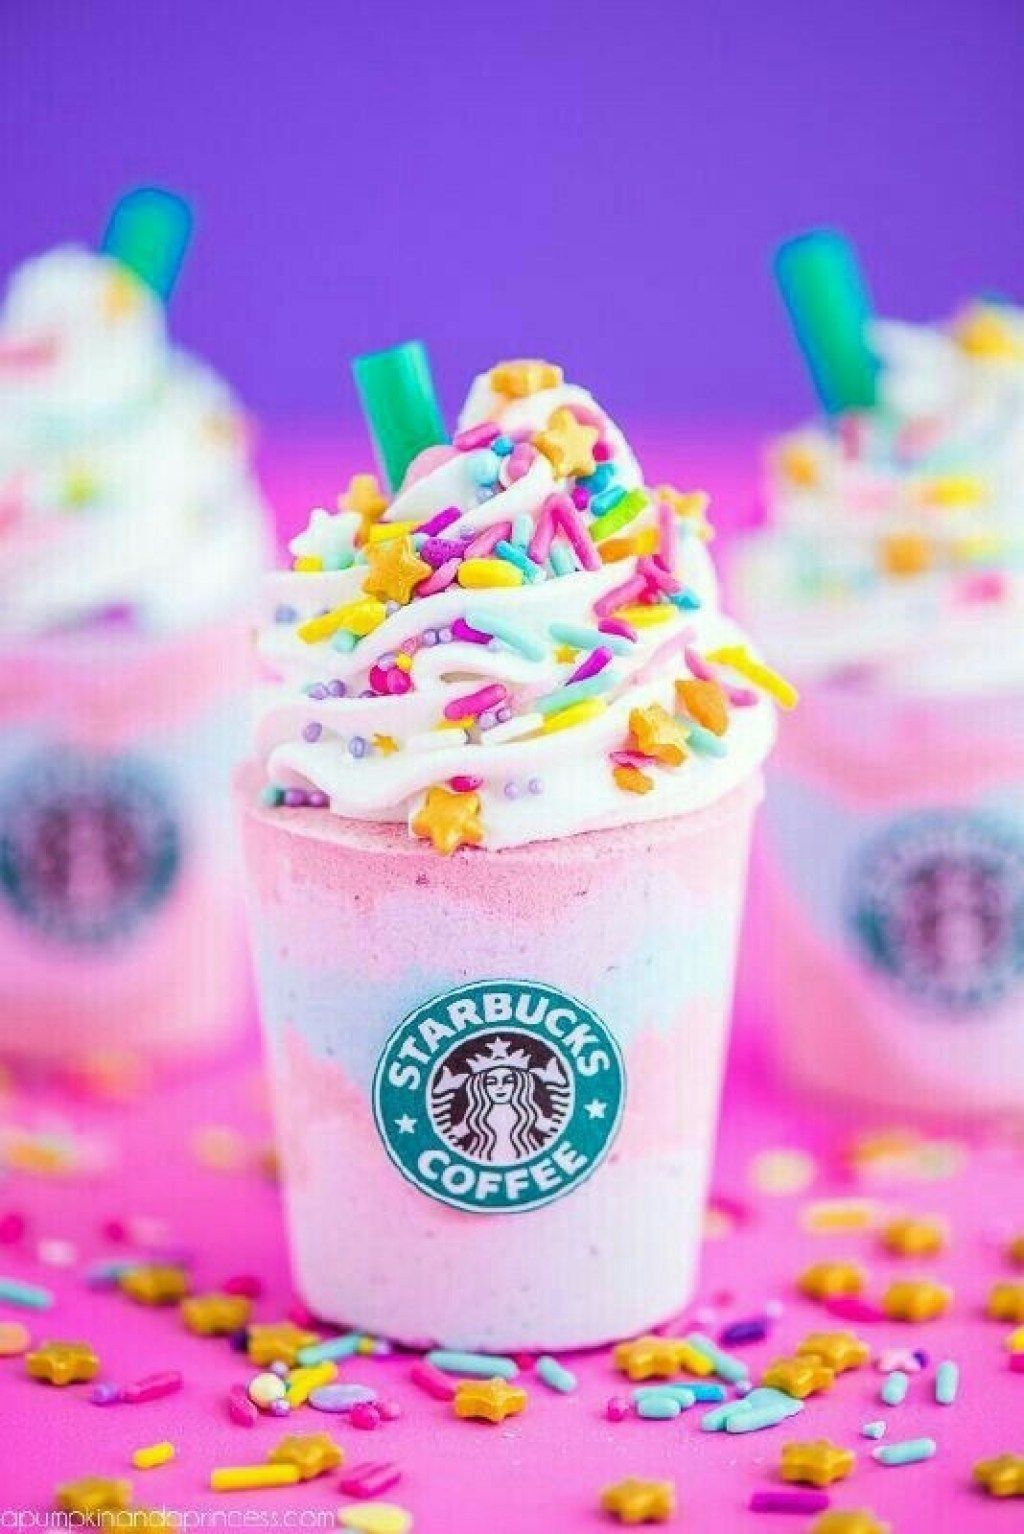 Cute Girly Starbucks Wallpapers Wallpapers